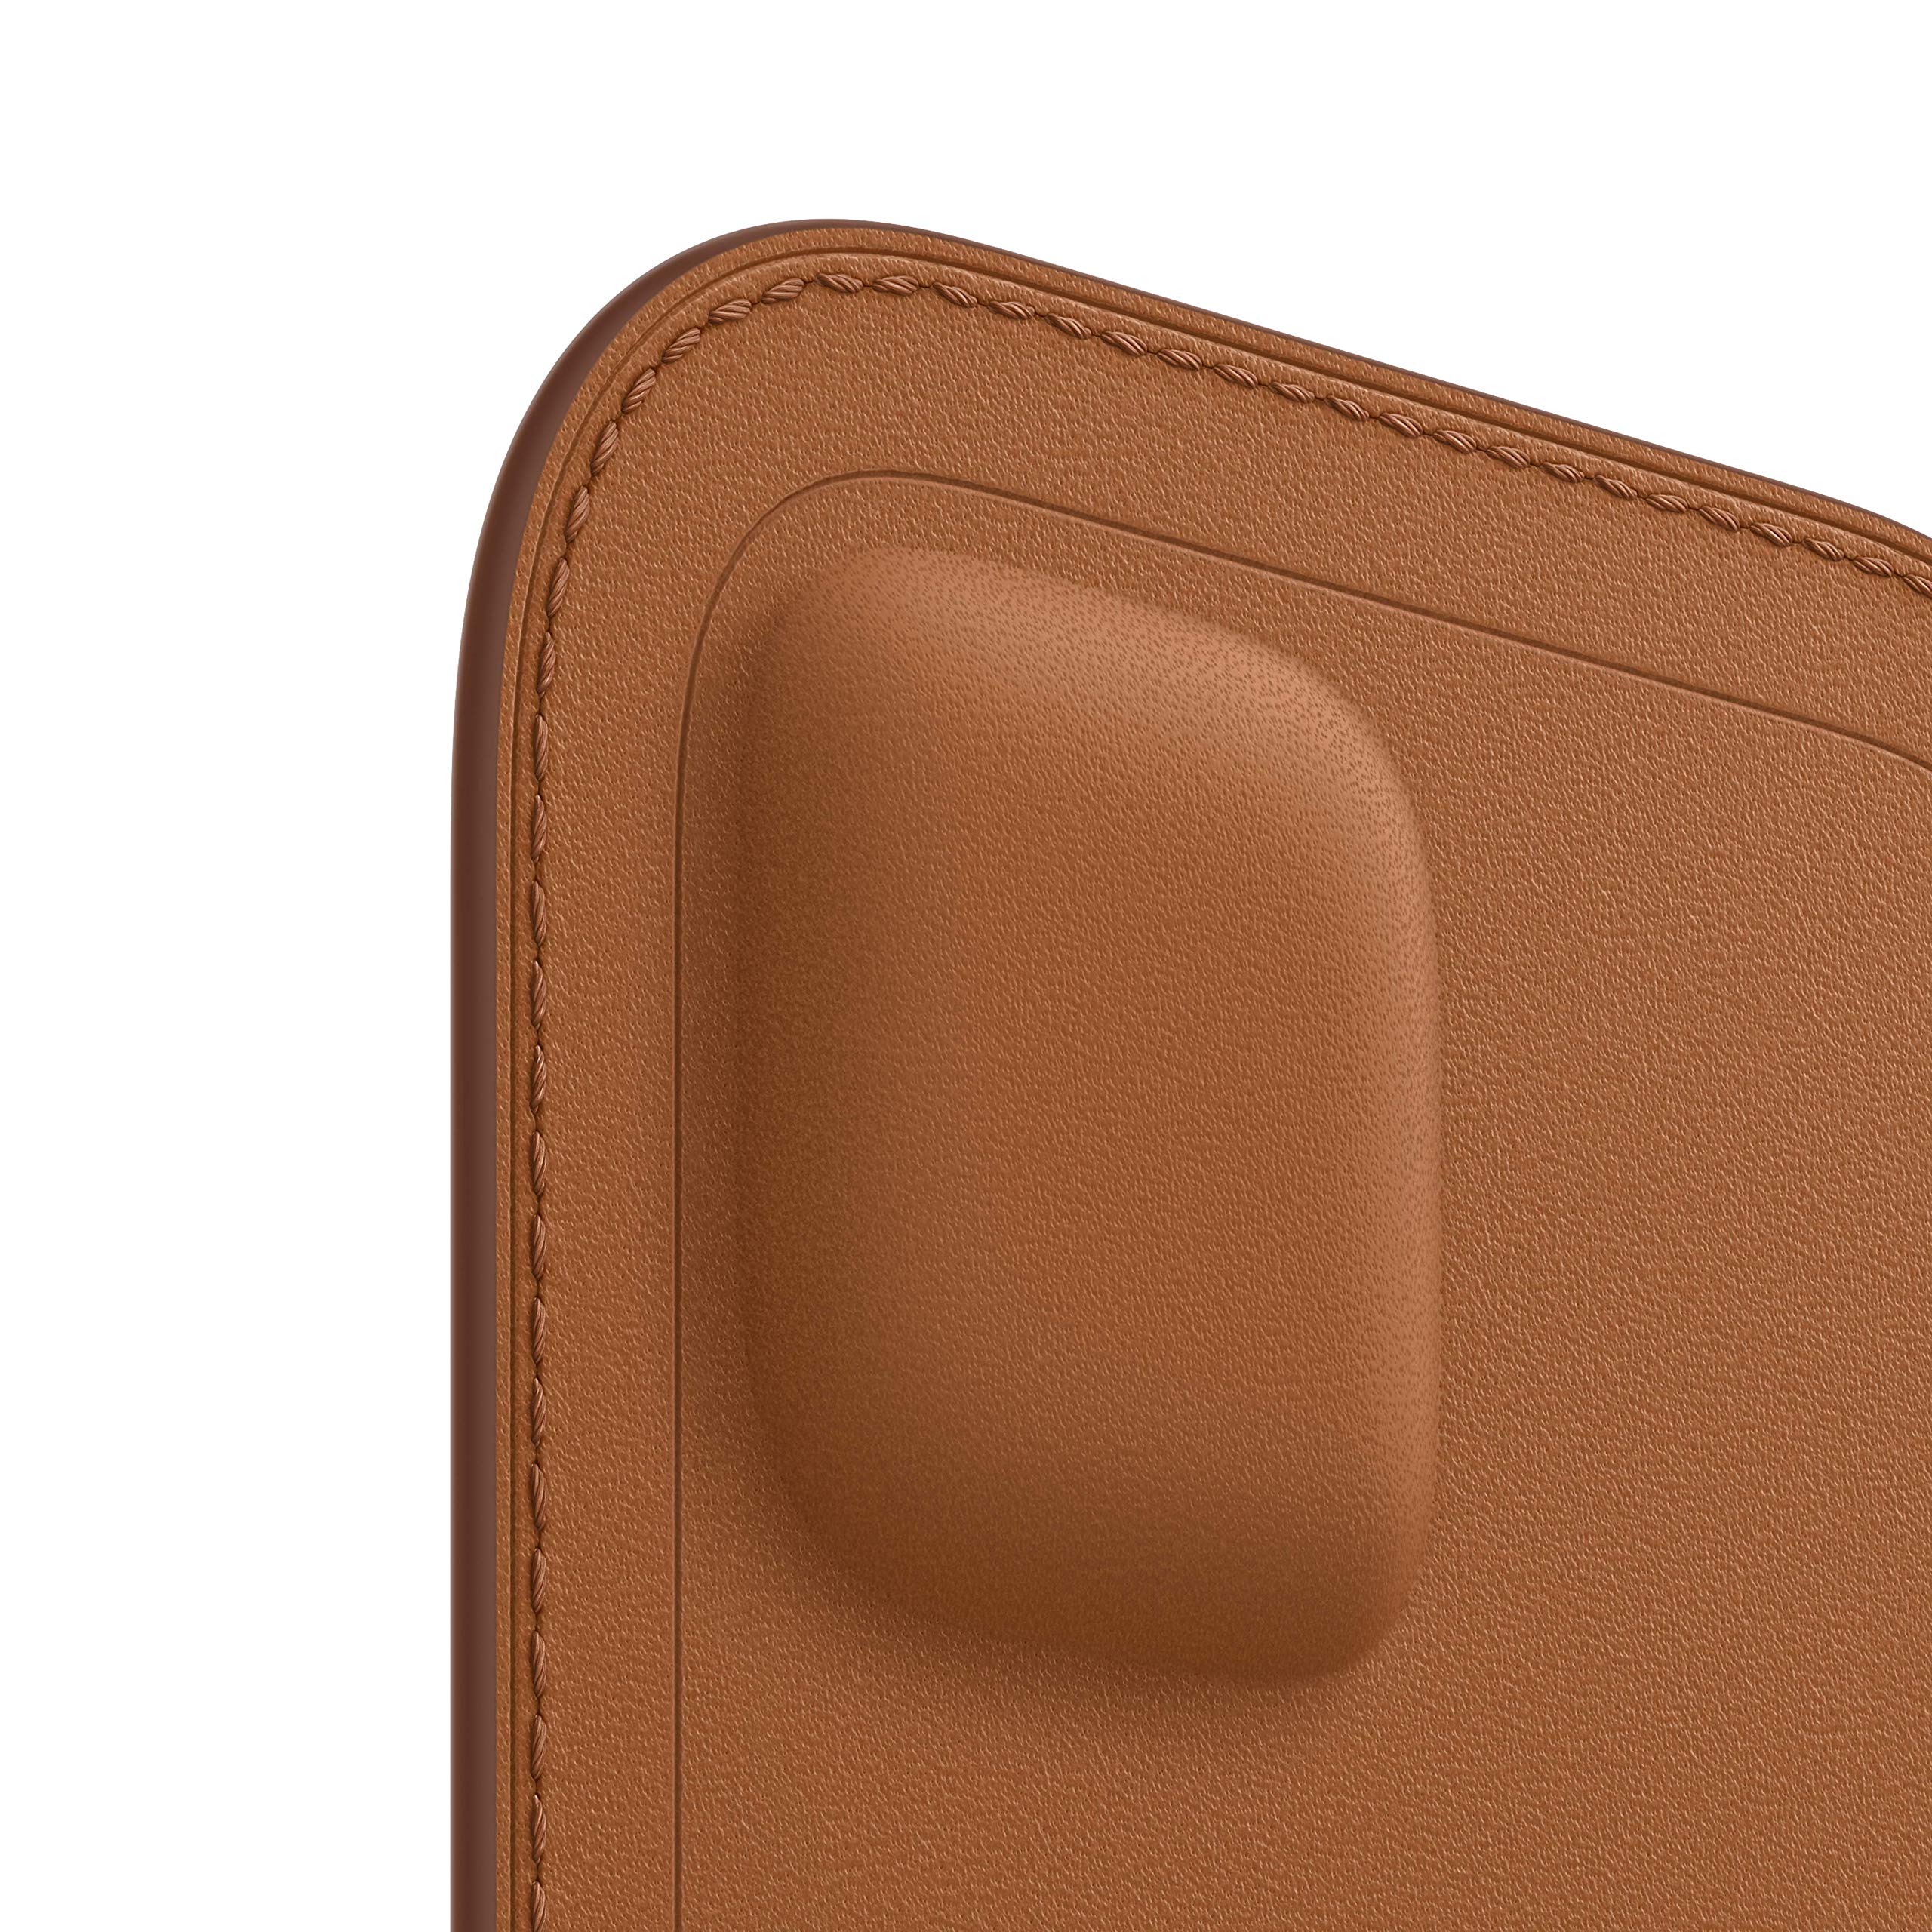 Apple iPhone 12 Mini Leather Sleeve with MagSafe - Saddle Brown